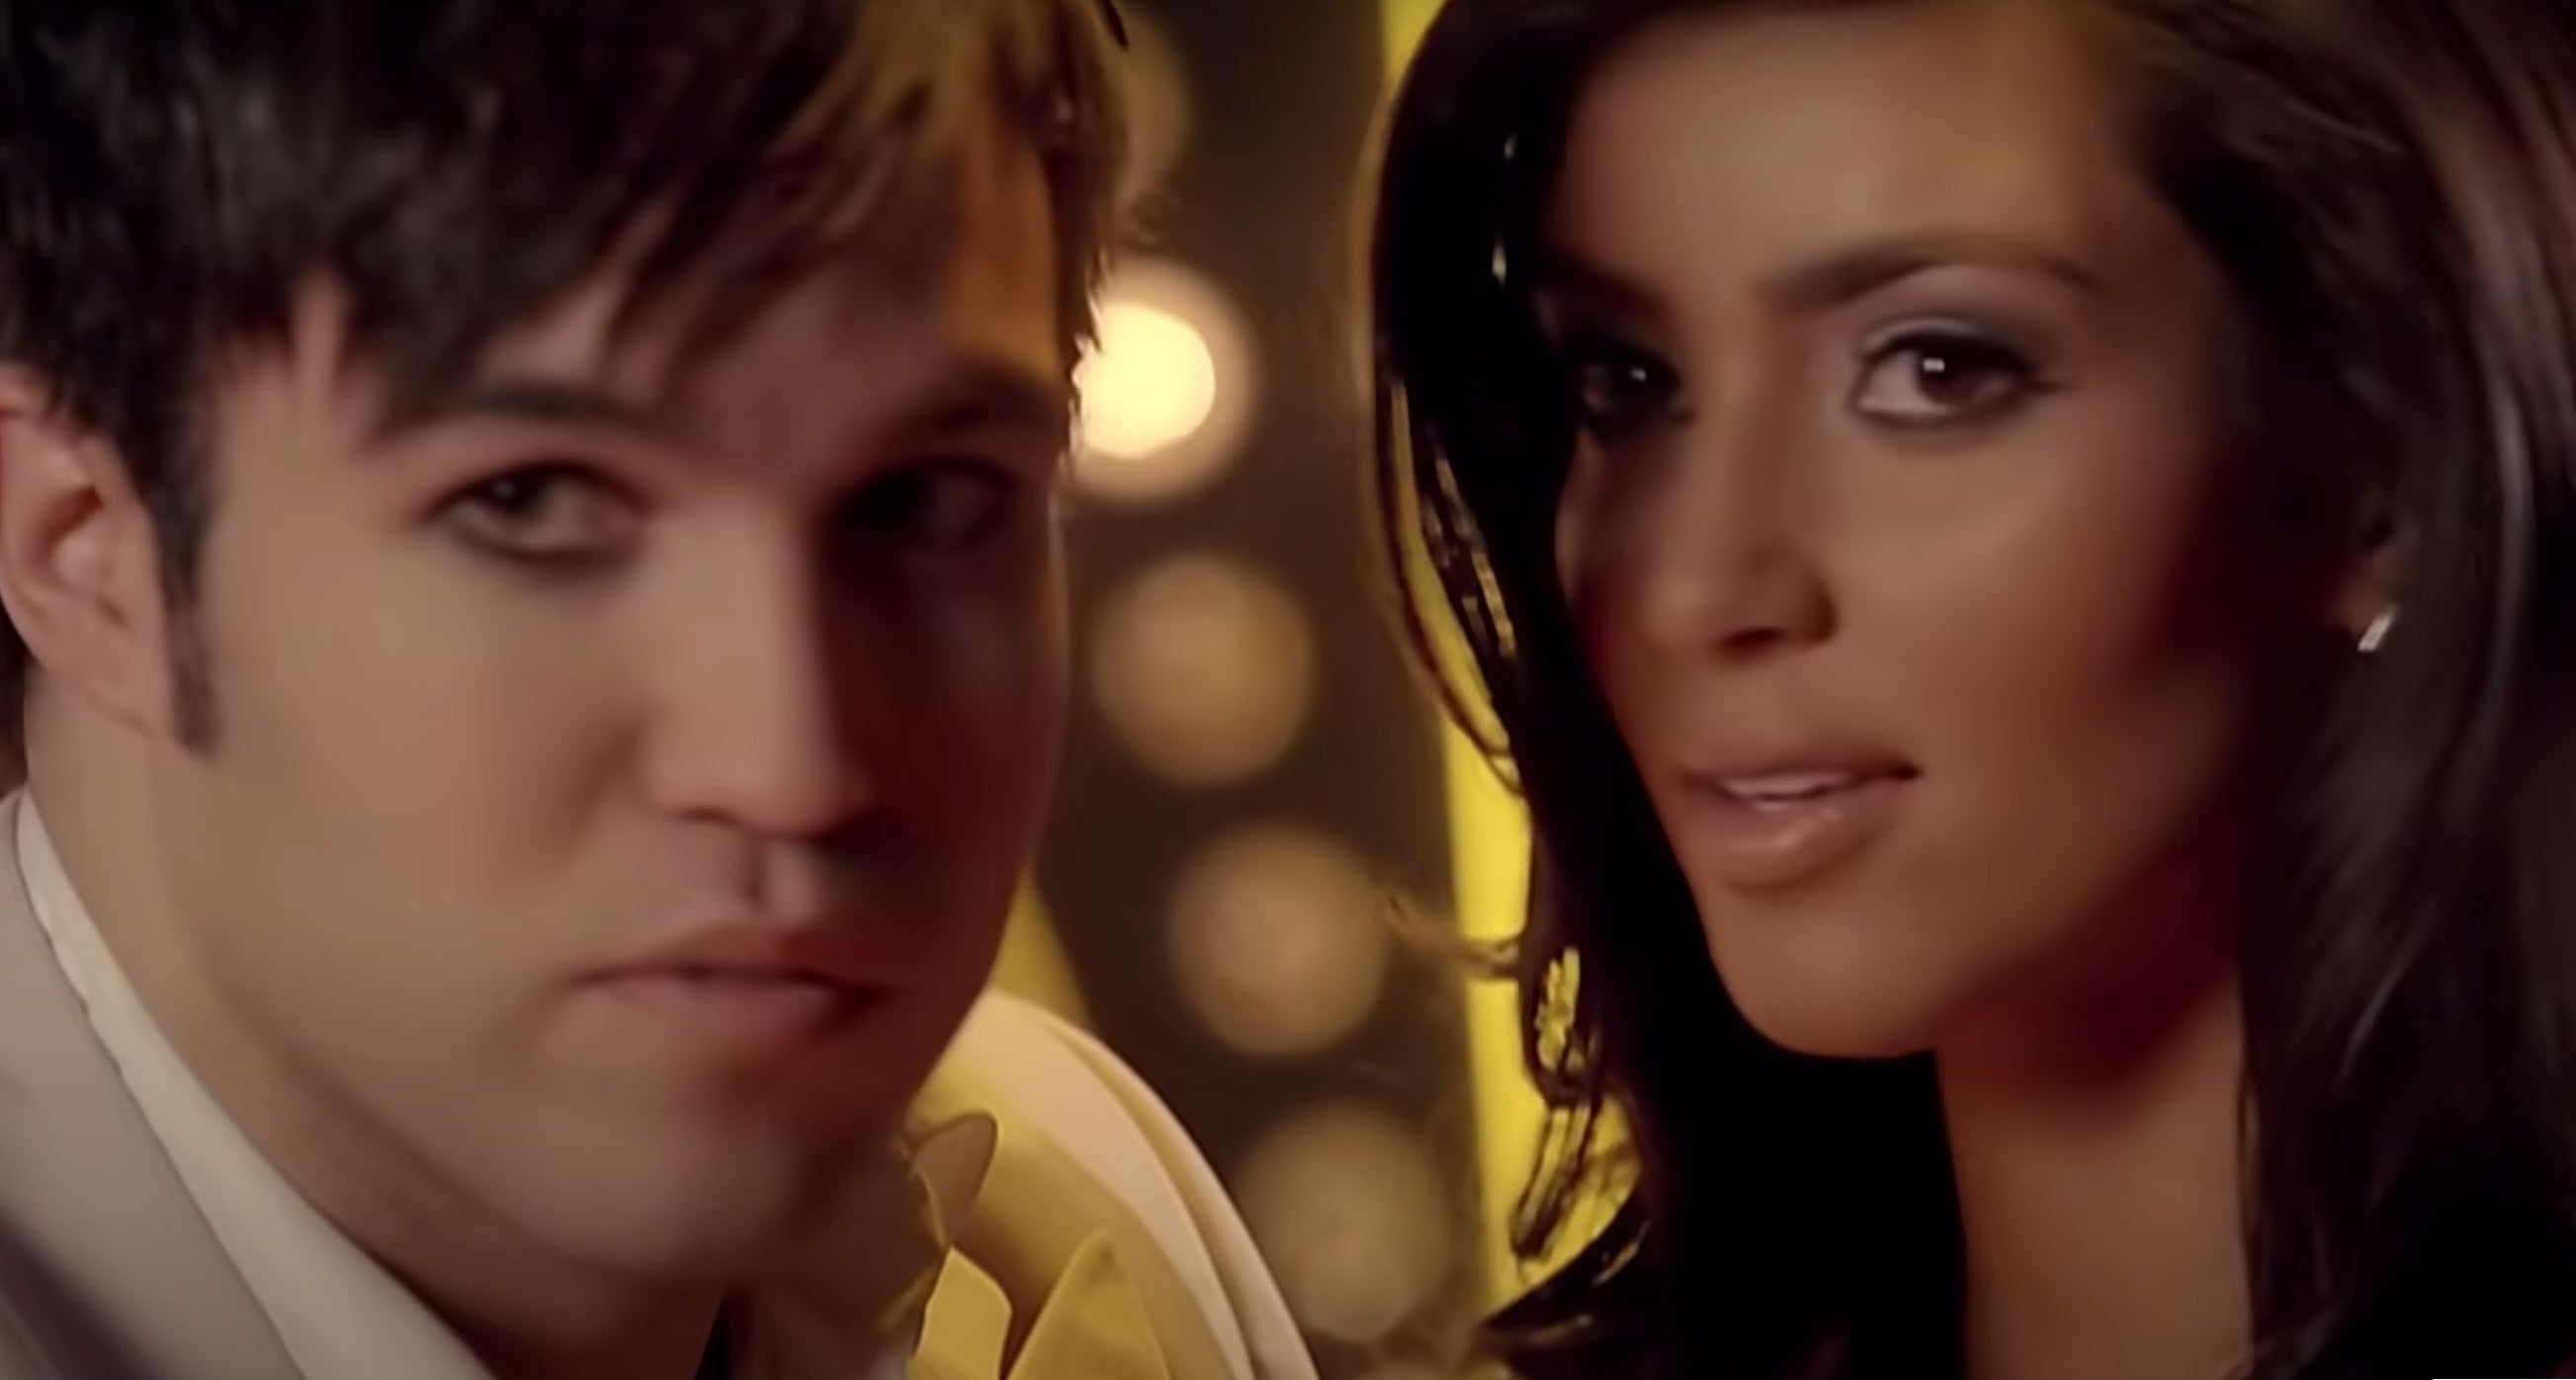 Pete Wentz and Kim Kardashian are shown in the &quot;Thnks fr th Mmrs&quot; music video